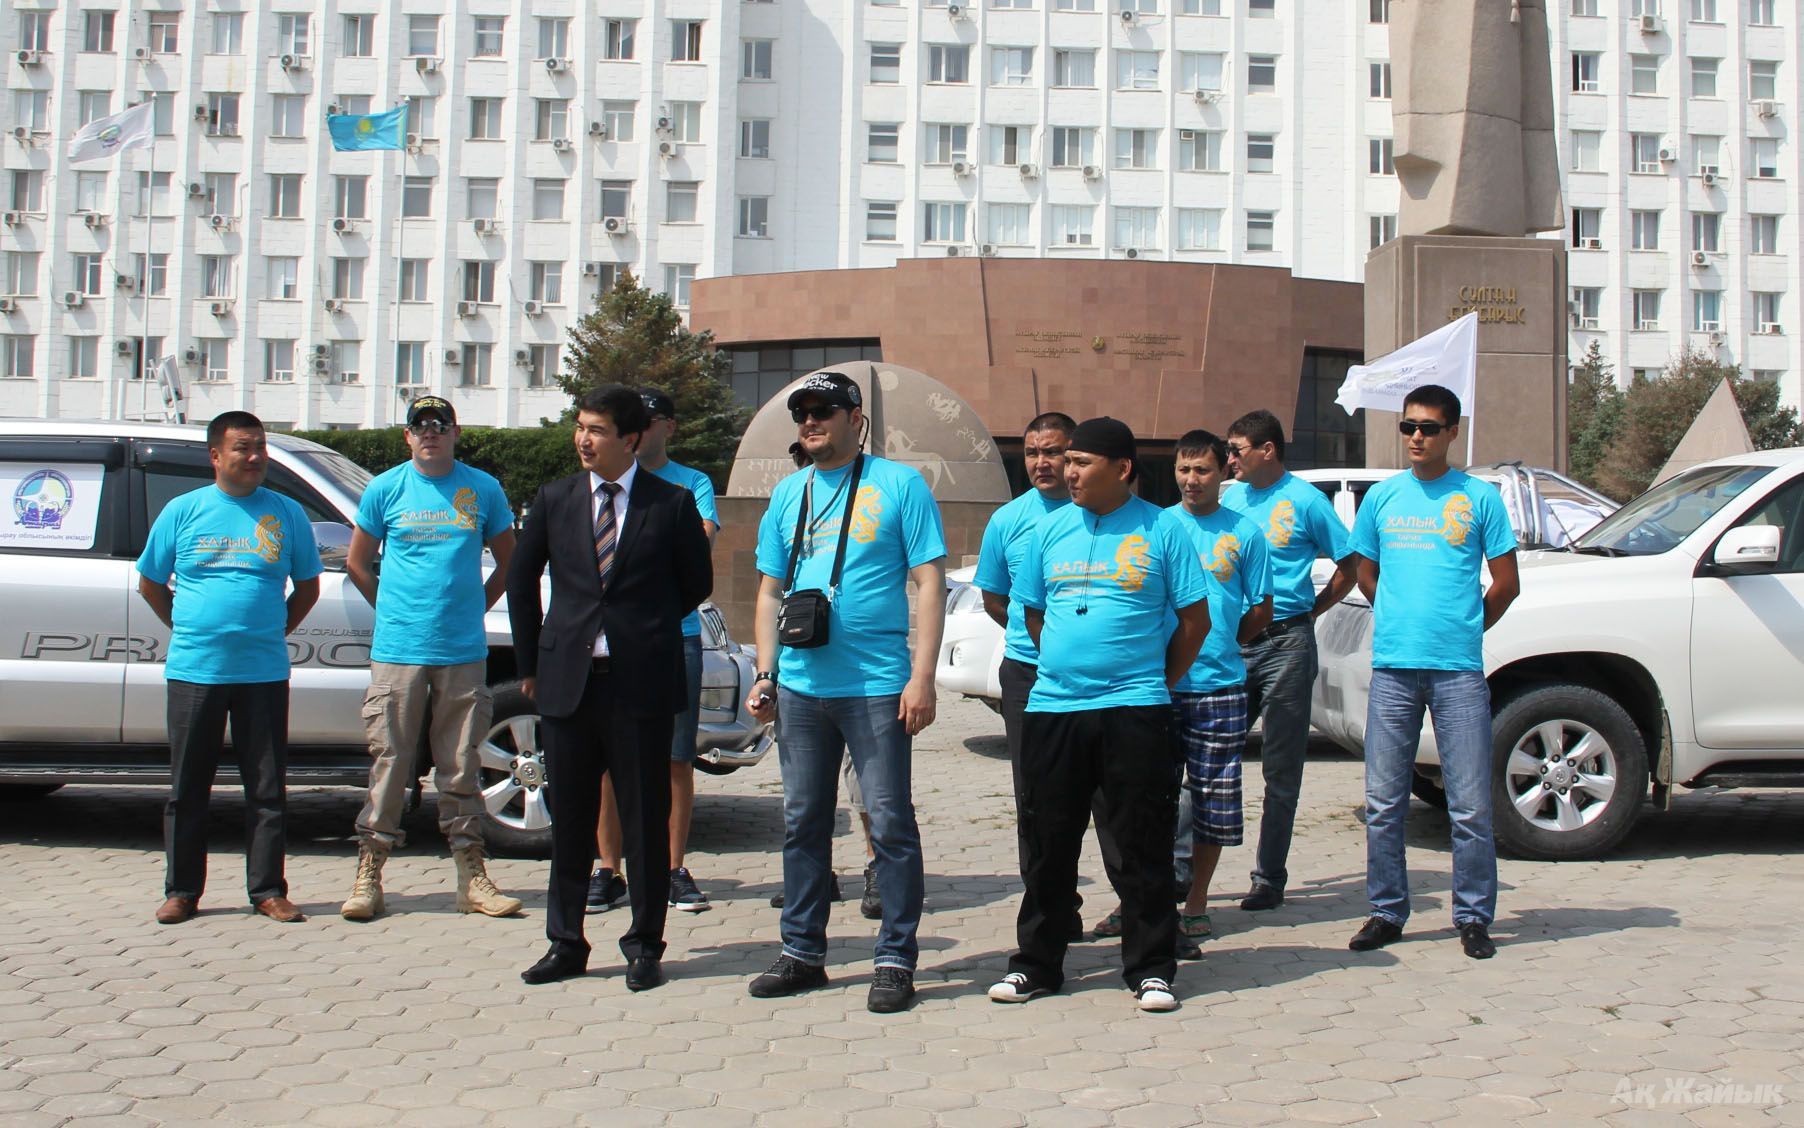 Atyrau Oblast Deputy Governor Shyngys MUKAN wishing good luck to the expedition team minutes before the journey